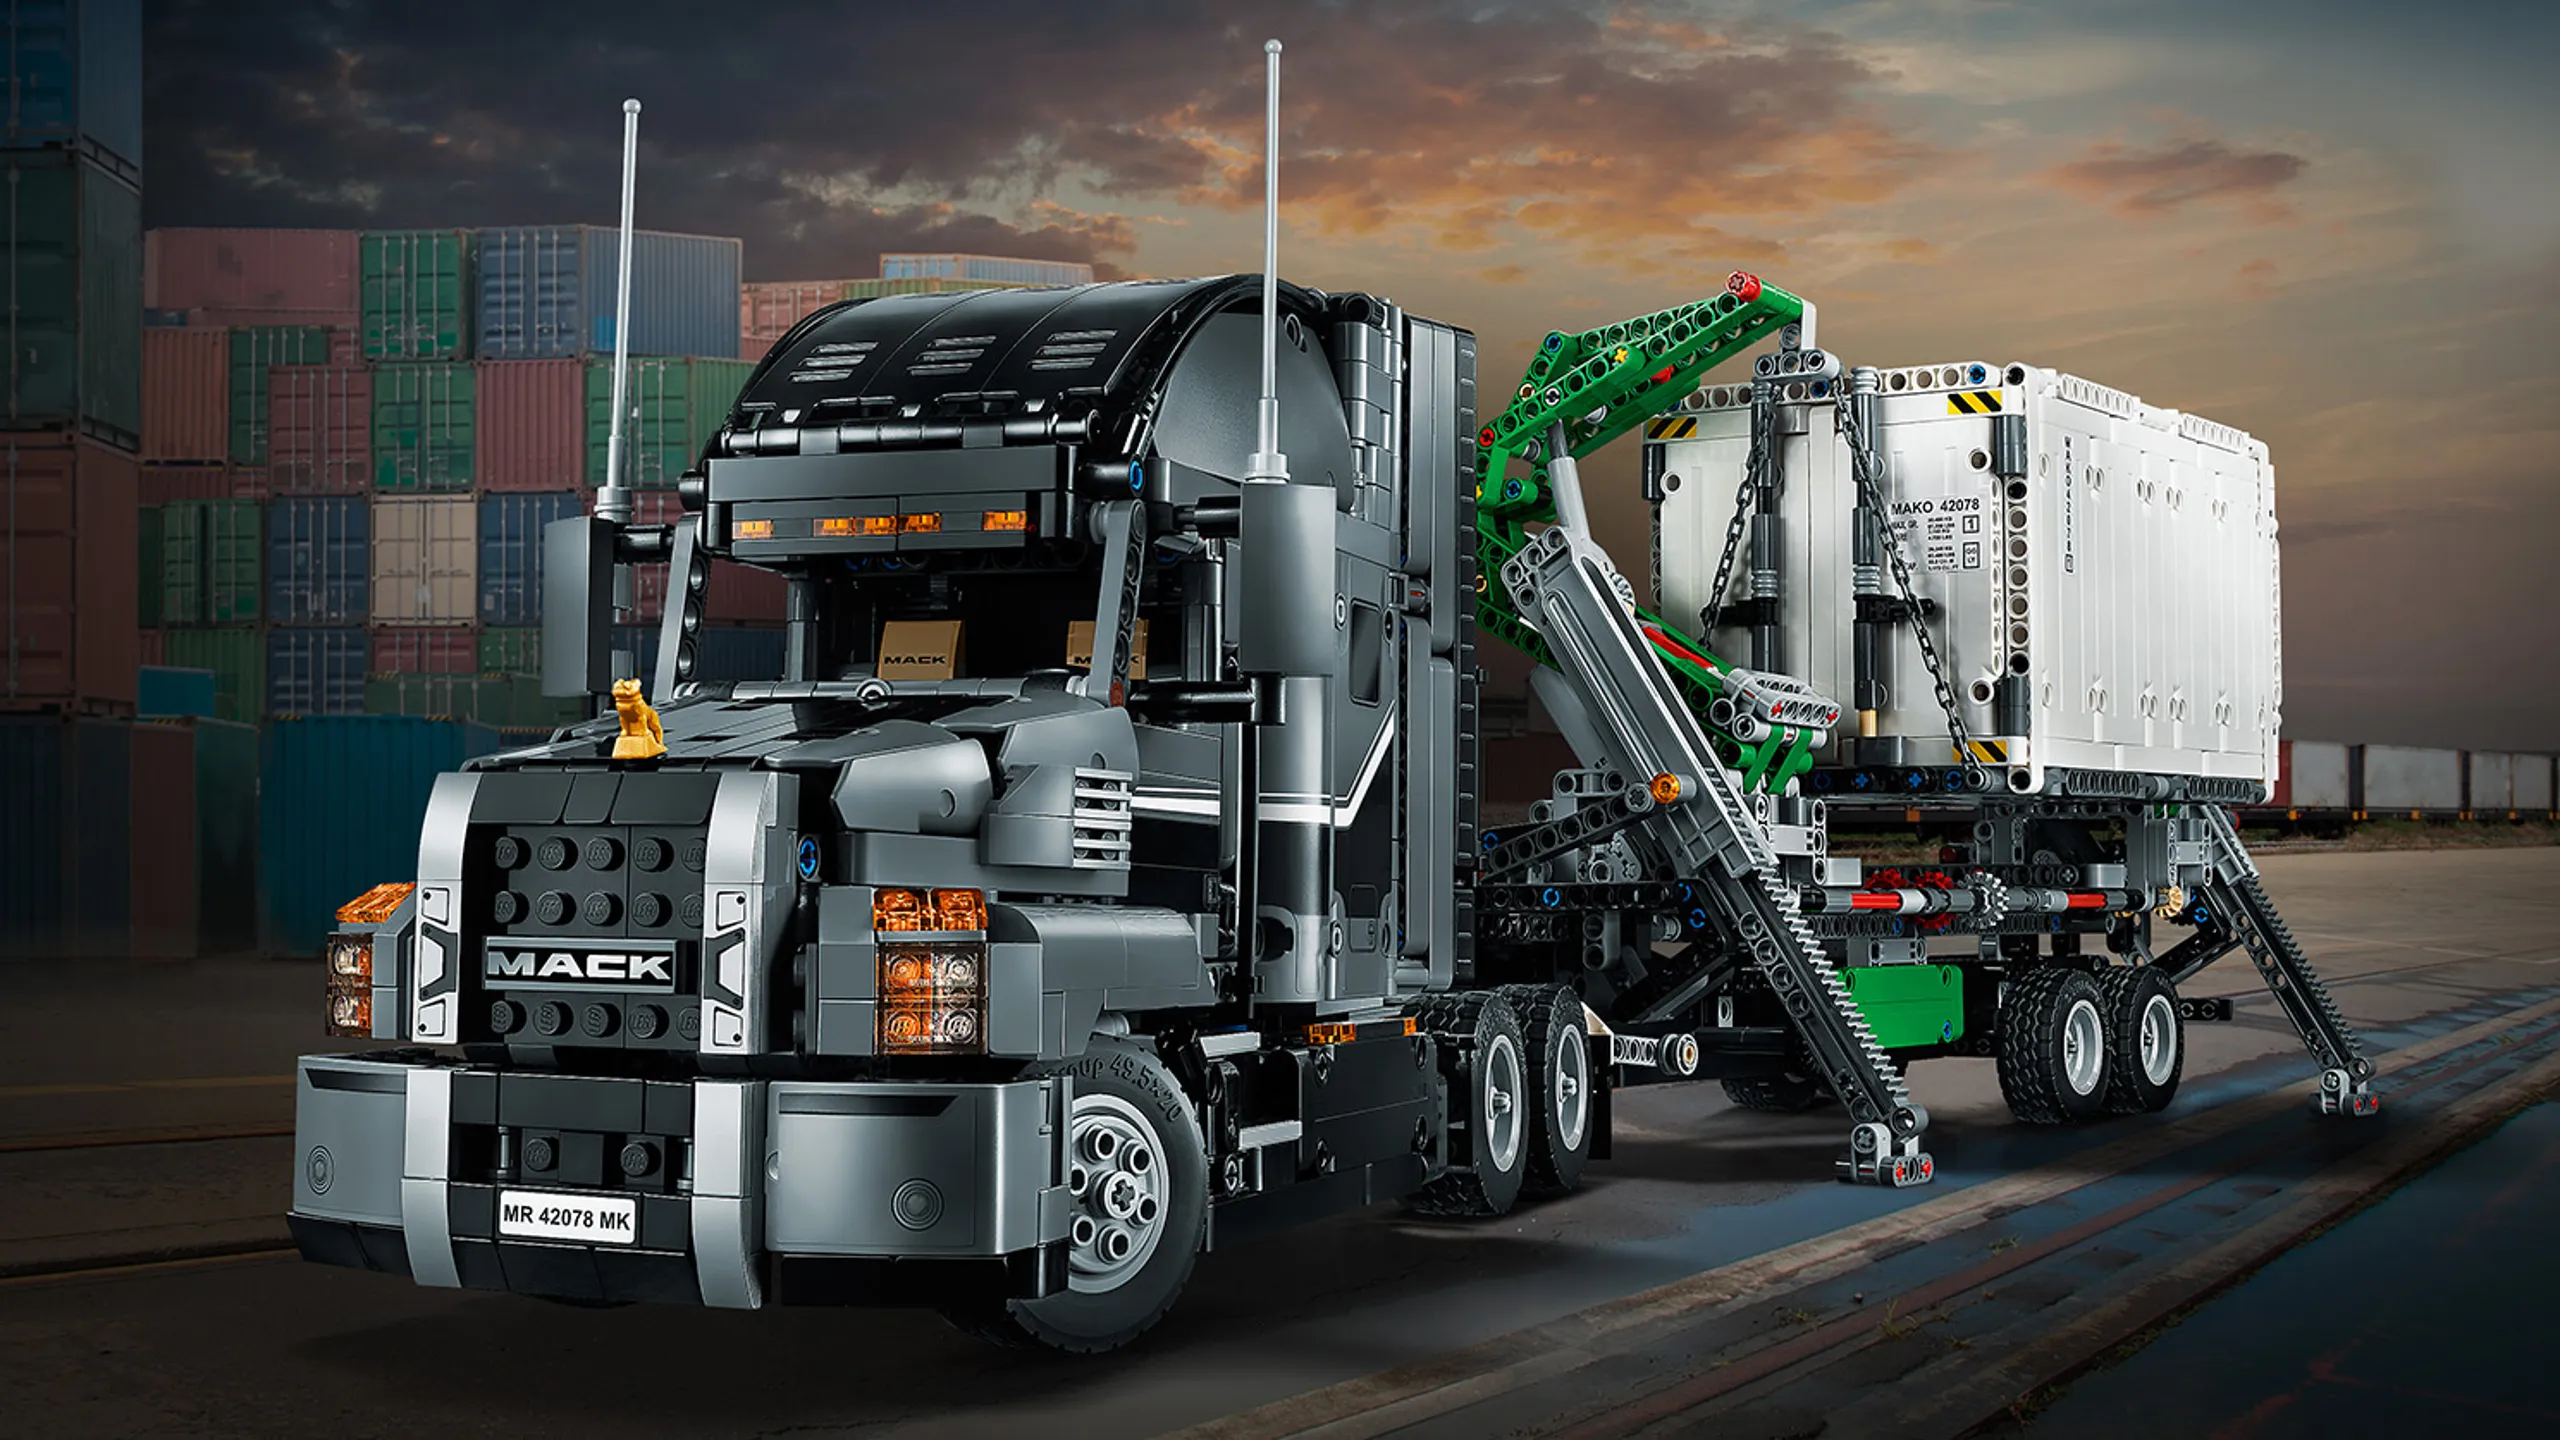 LEGO Technic - 42078 Mack Anthem - This replica is developed with Mack Trucks Inc. and has an array of detailed features: detailed drivers cab with steering wheel and detailed dashboard, sun visors and much more!